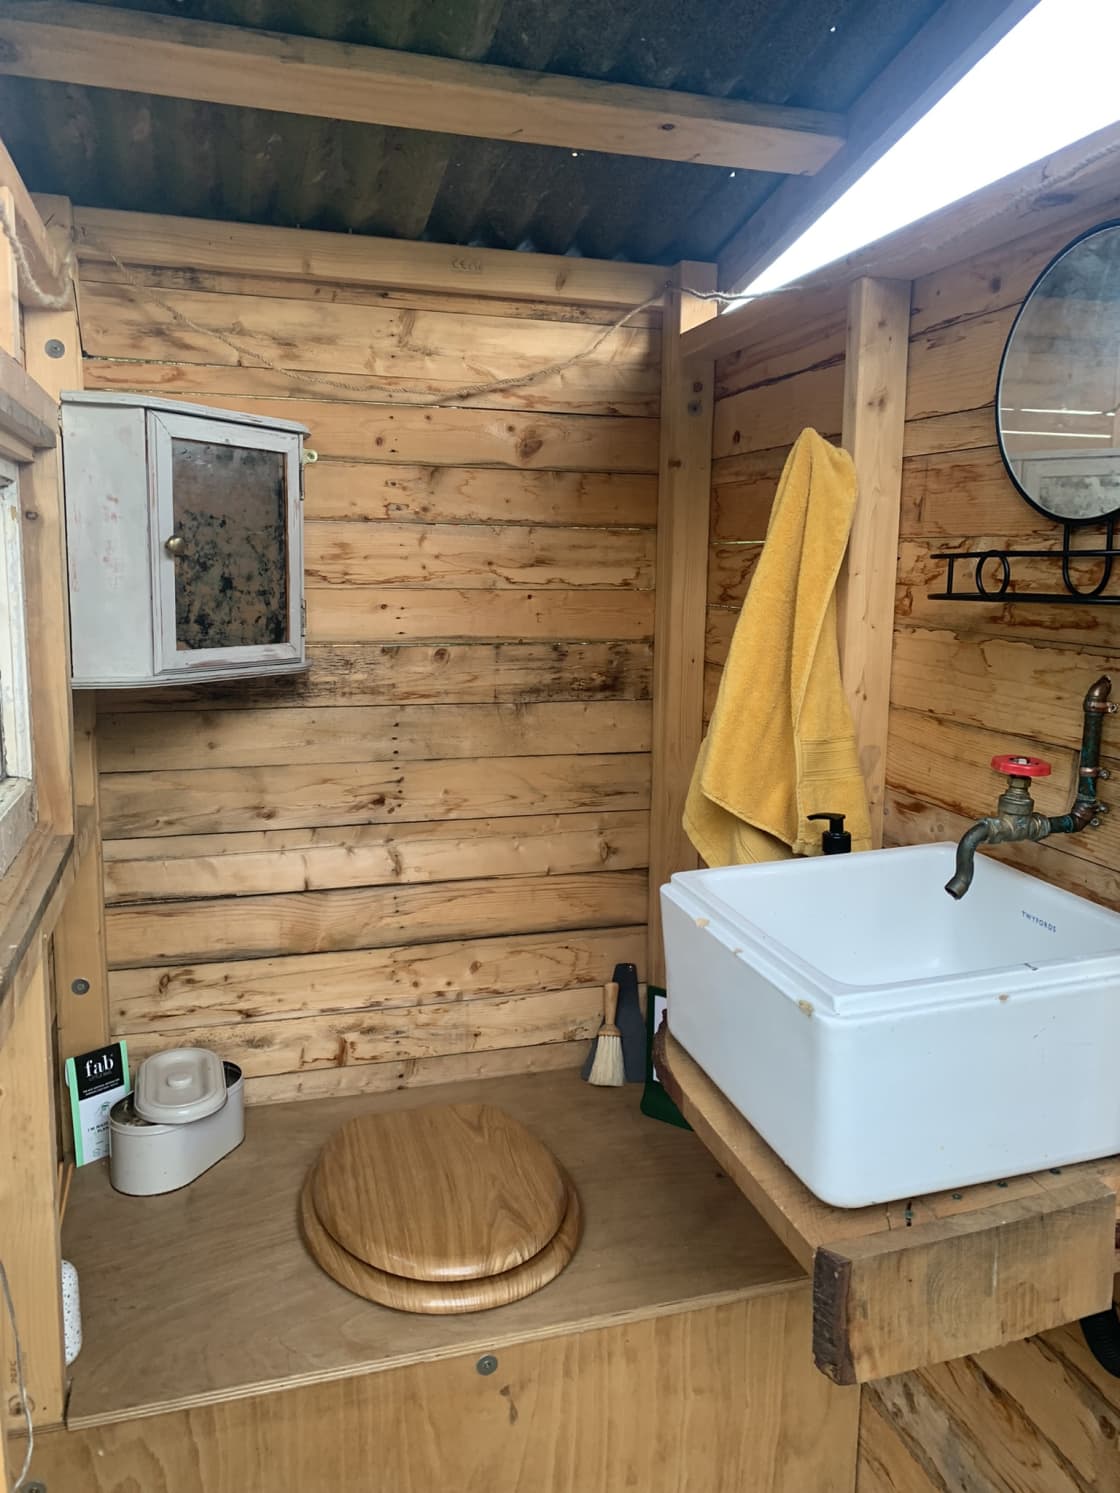 The Tin Shed Glamping